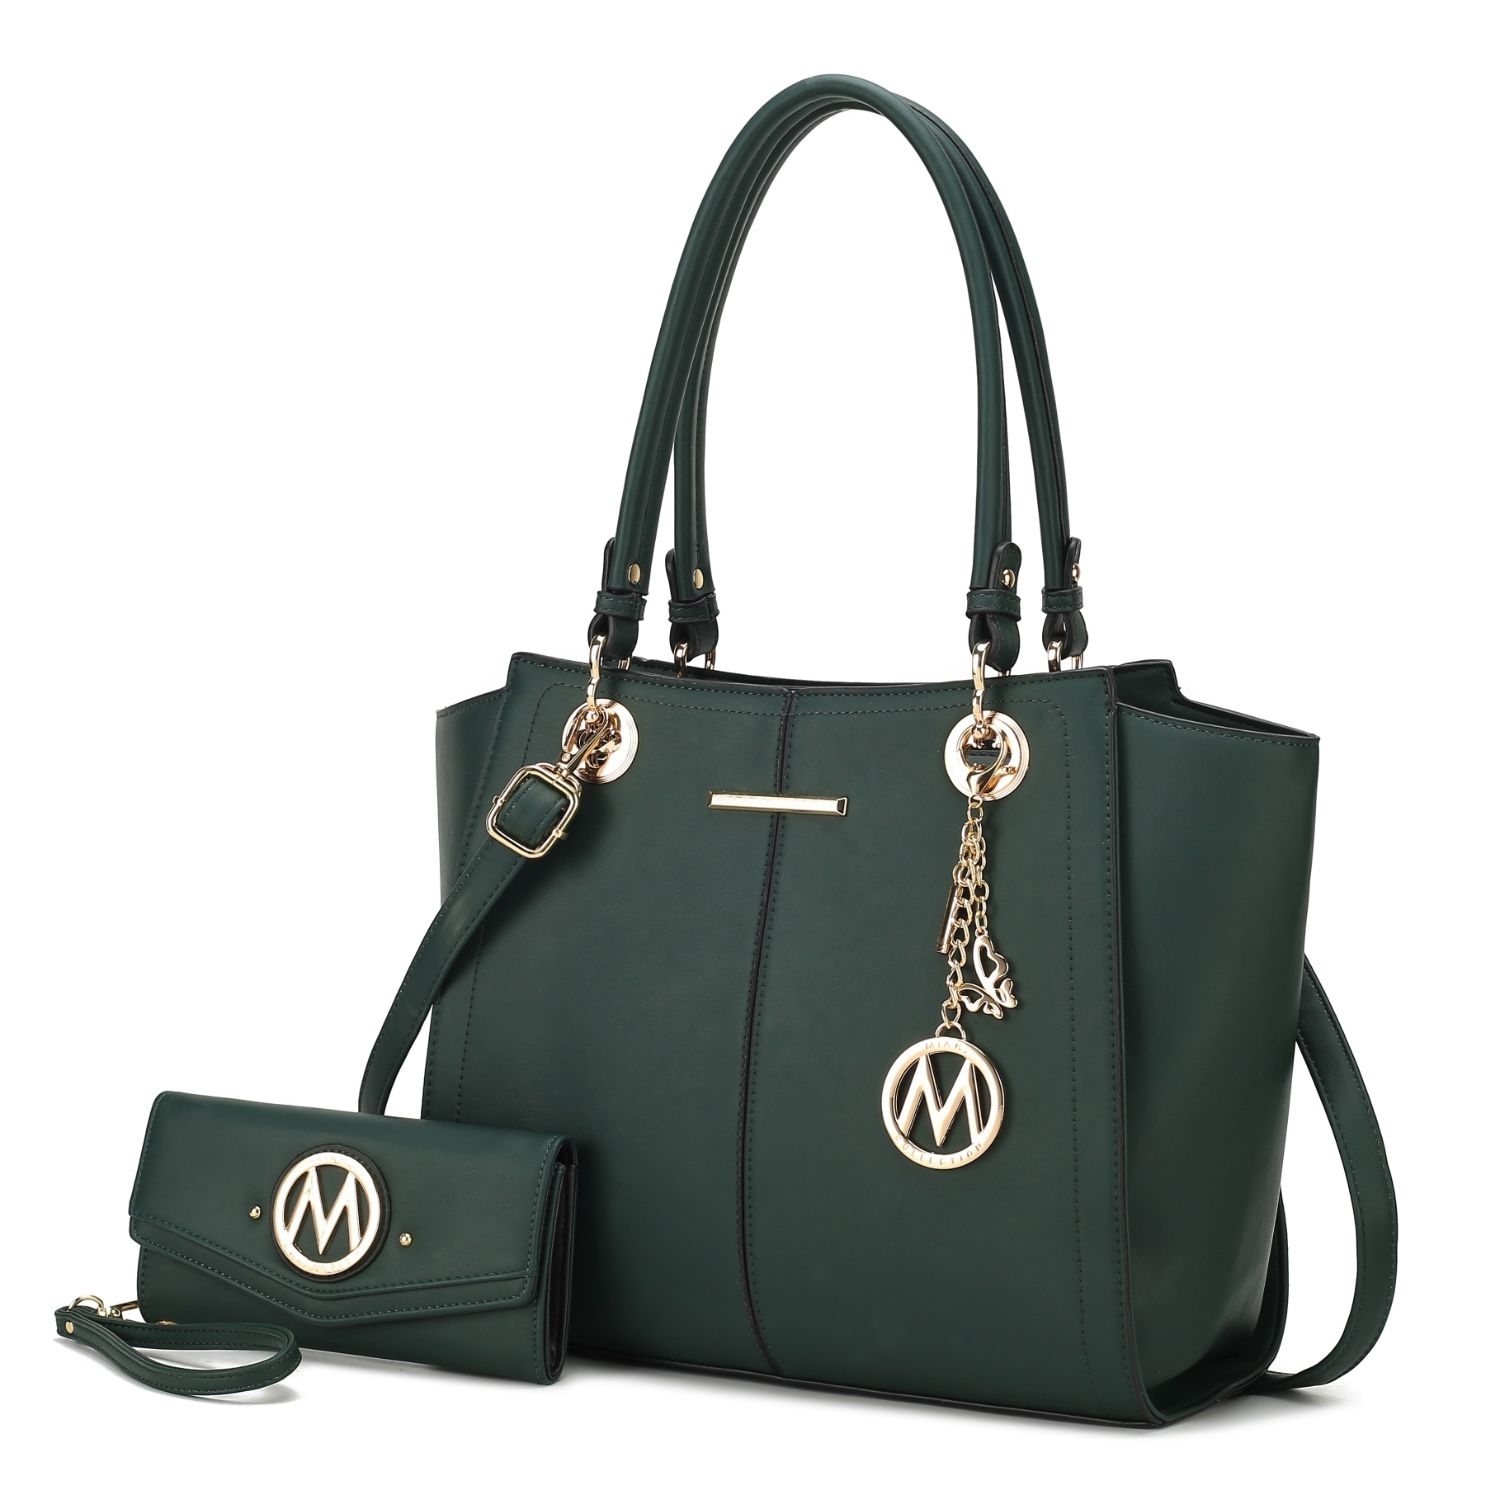 MKF Collection Ivy Vegan Leather Women's Tote Handbag By Mia K With Wallet -2 Pieces - Teal